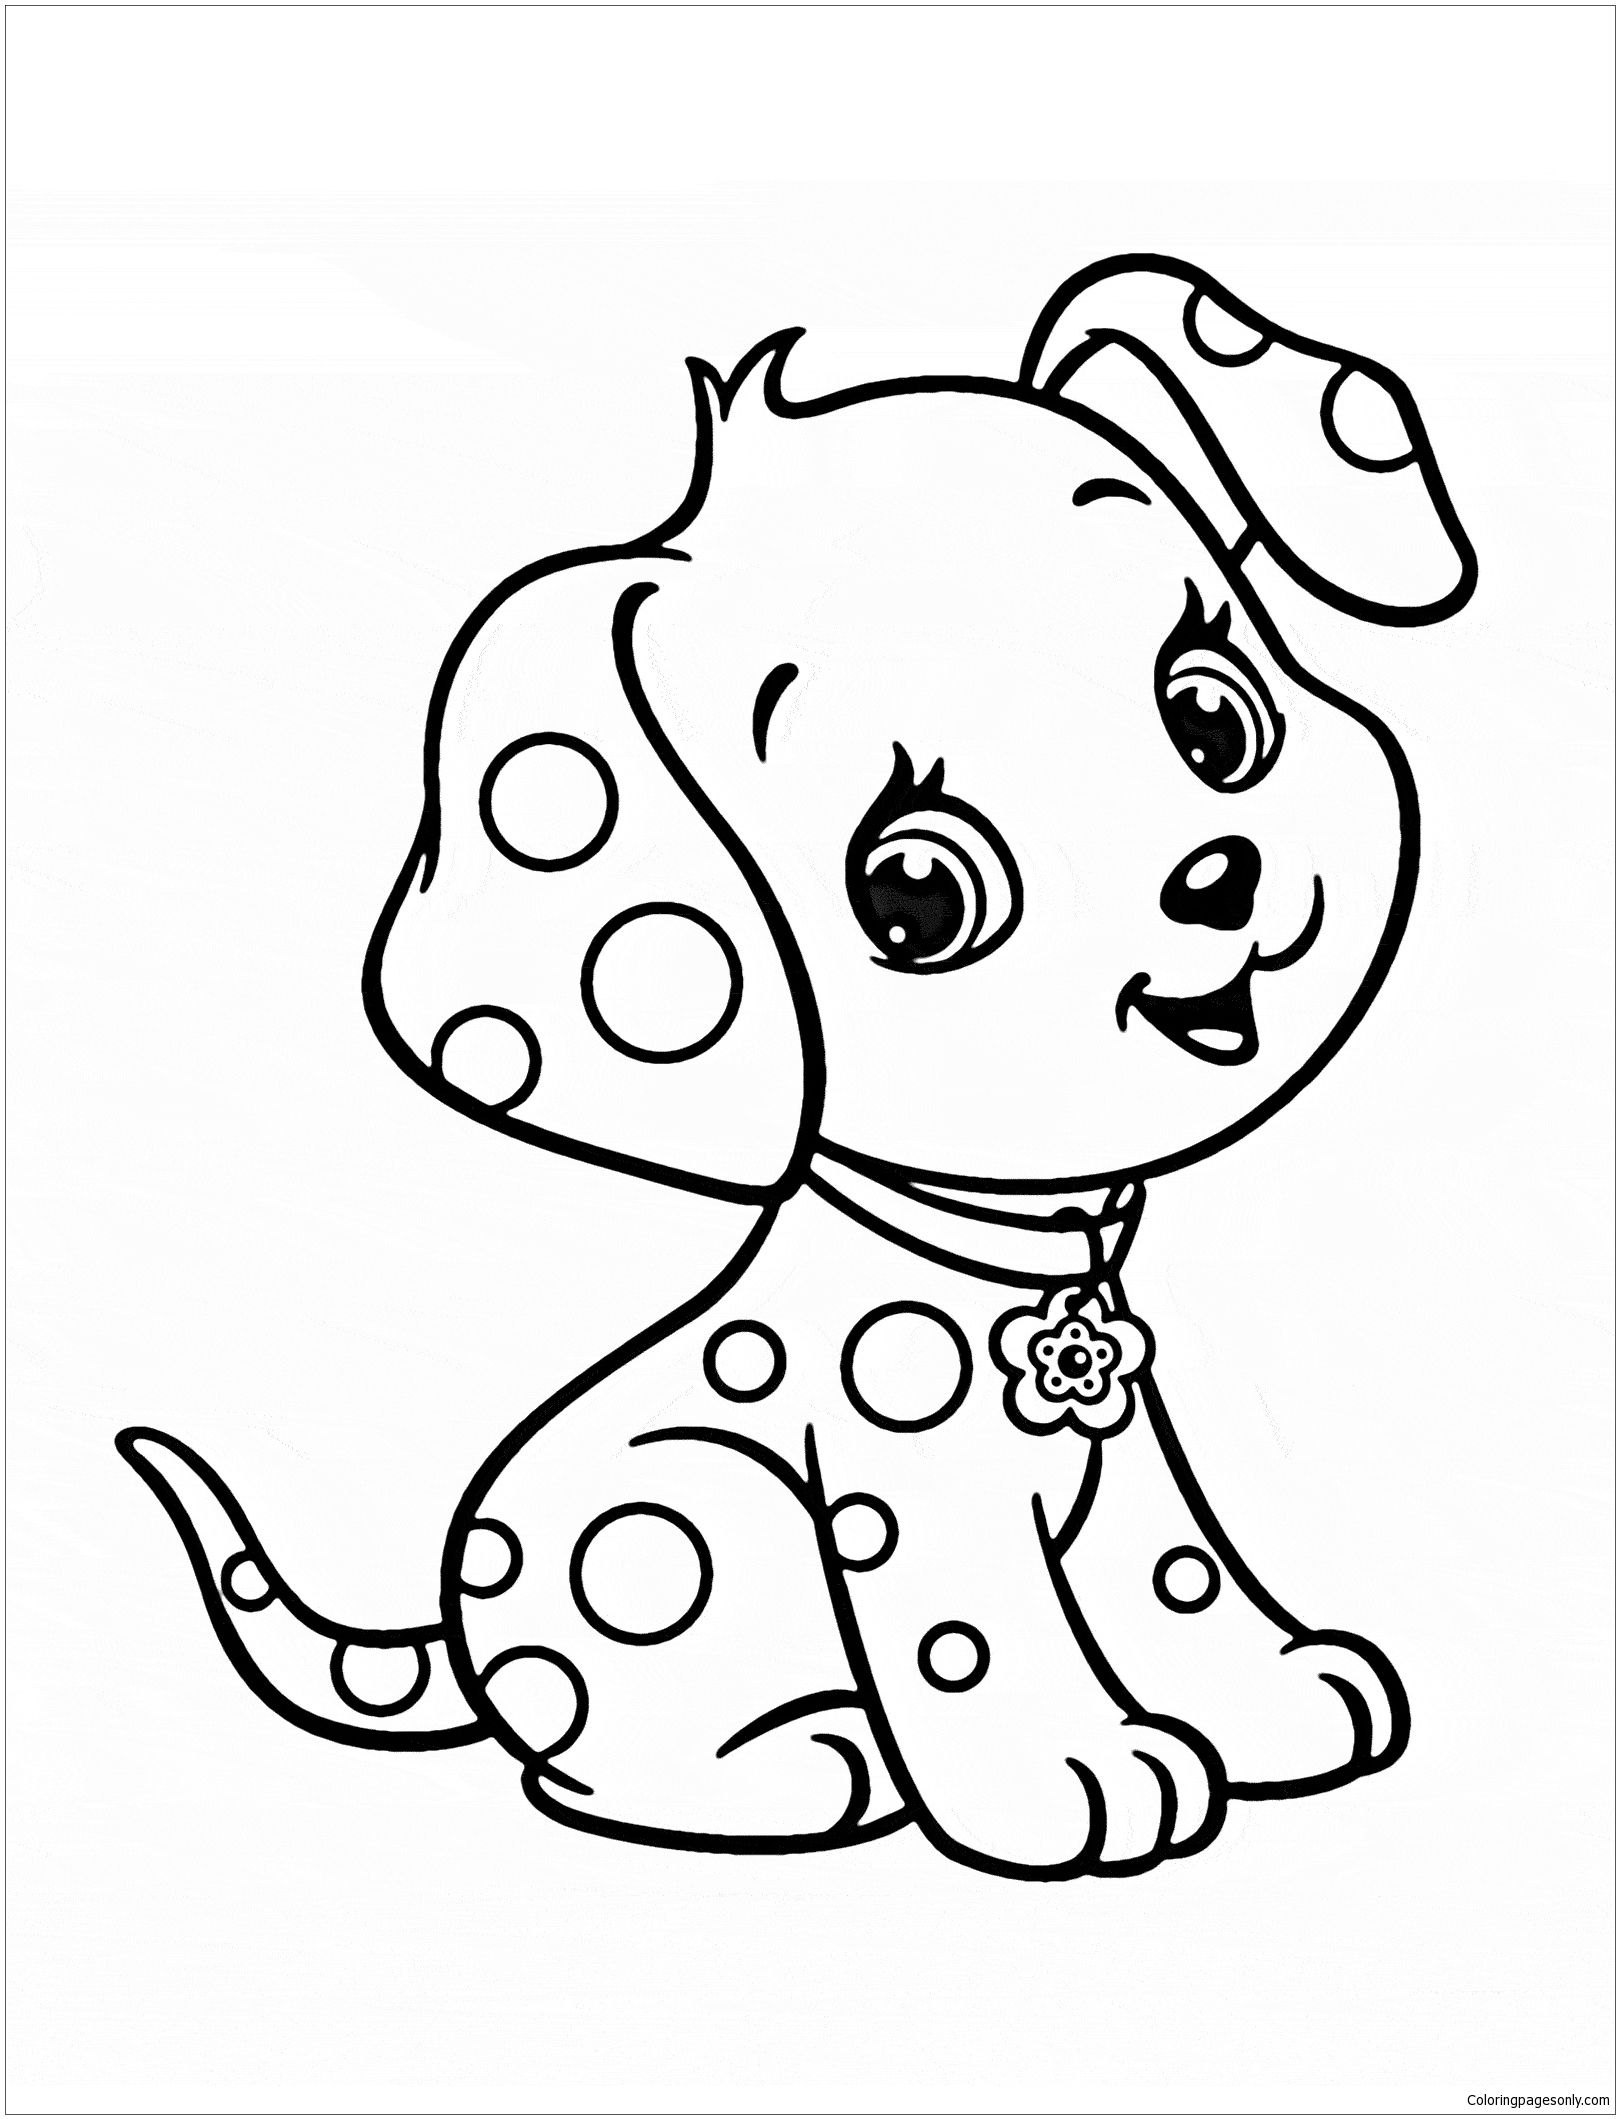 Cute Puppy 5 Coloring Page Puppy coloring pages, Dog coloring page